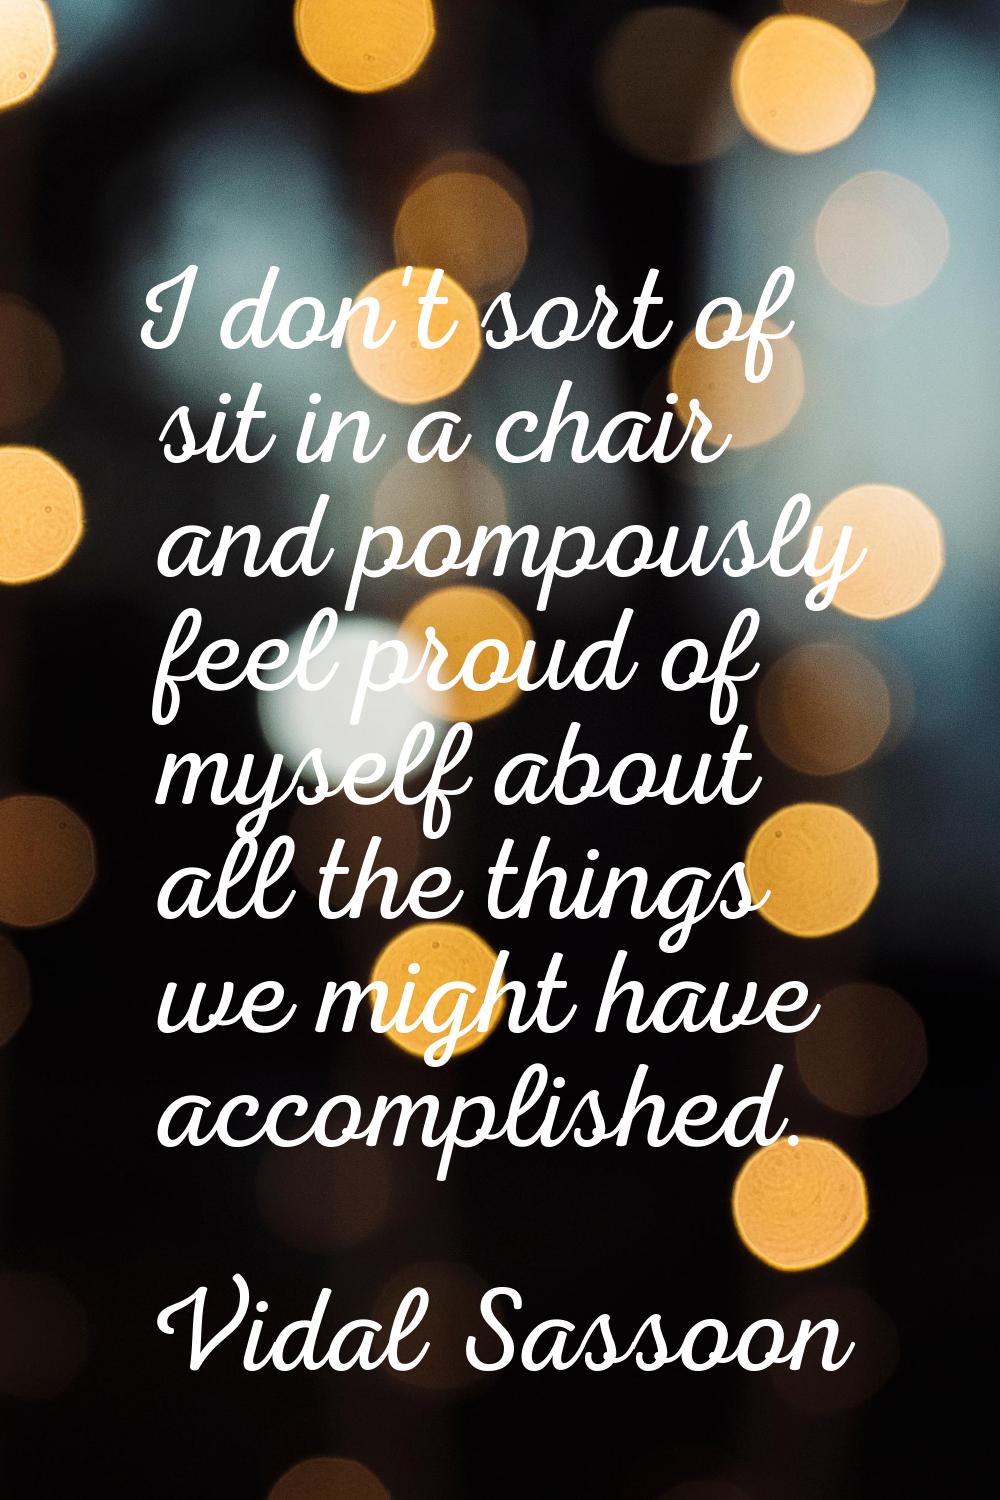 I don't sort of sit in a chair and pompously feel proud of myself about all the things we might hav